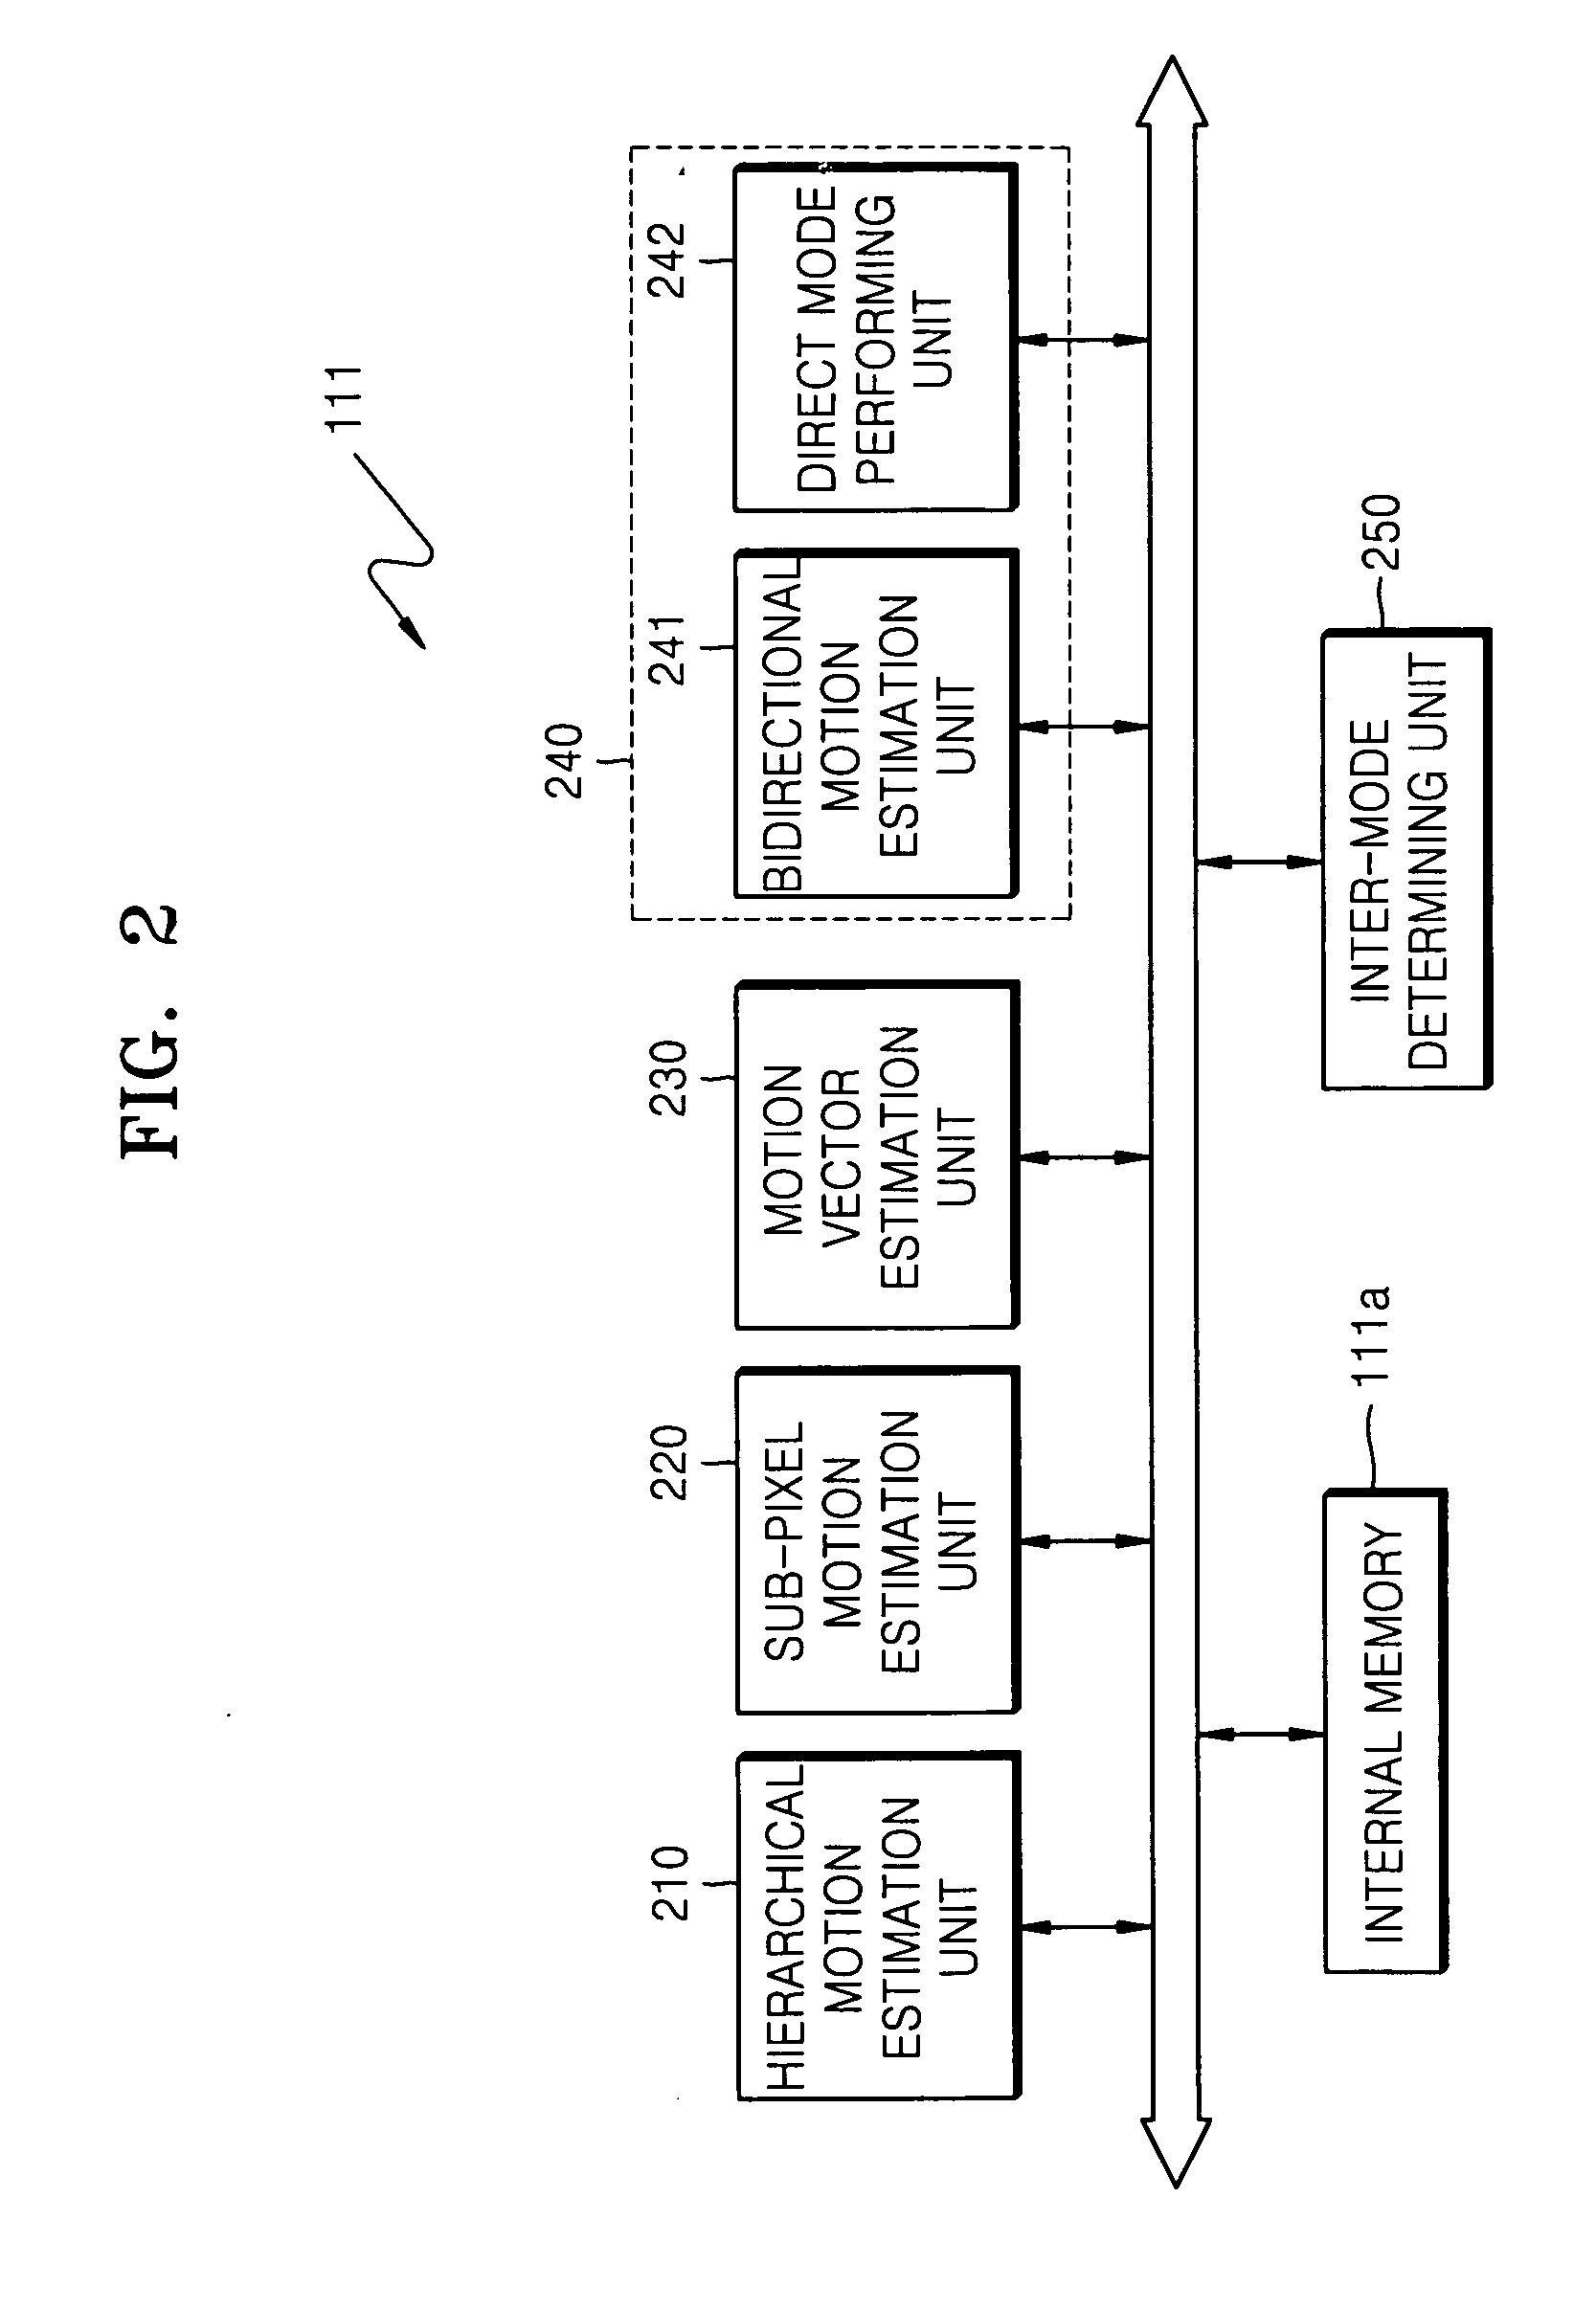 Method and apparatus for determining inter-mode in video encoding